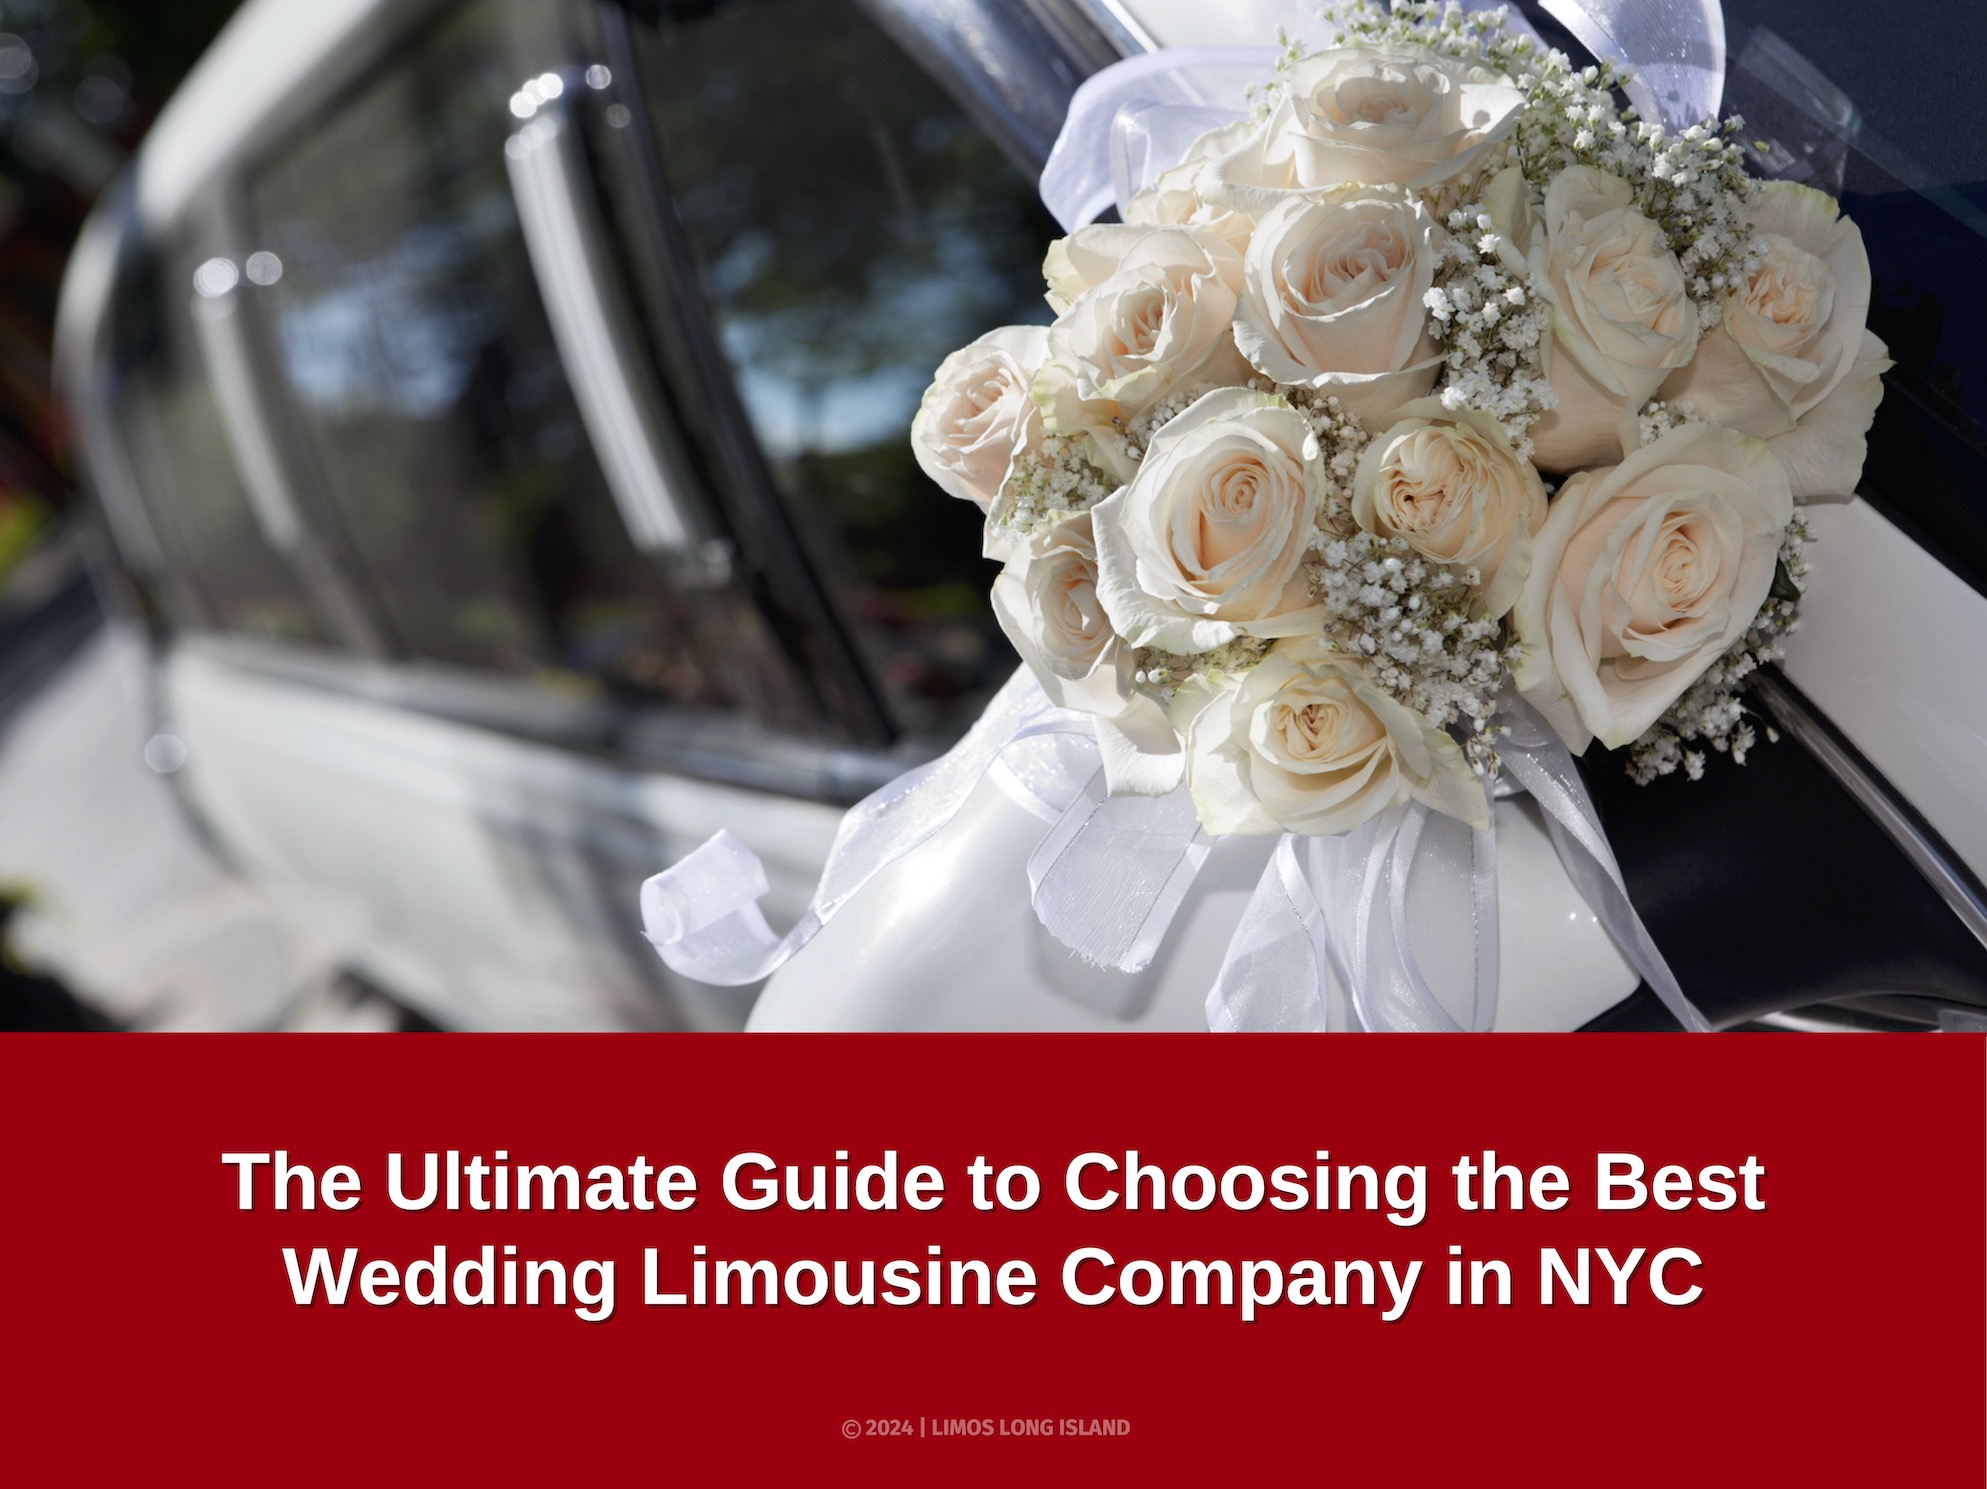 The Ultimate Guide to Choosing the Best Wedding Limousine Company | Wedding Transportation in NYC